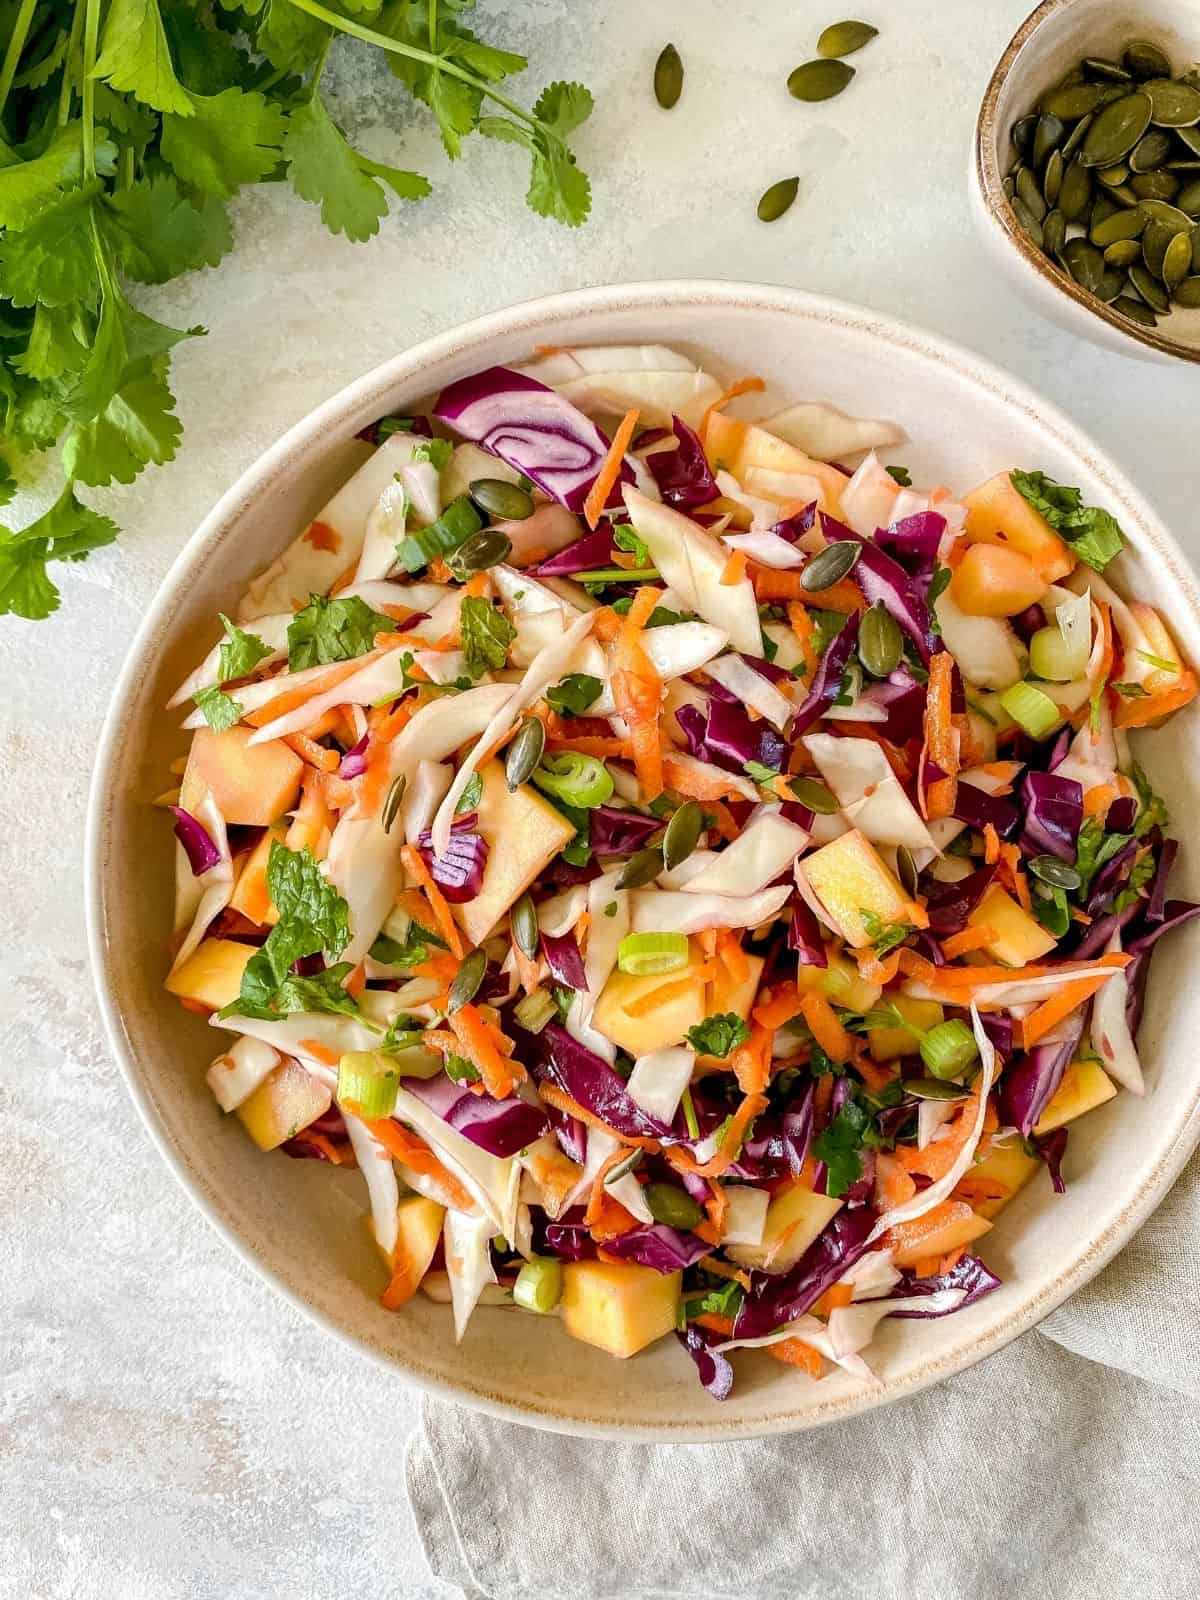 tropical mango coleslaw in a brown bowl with fresh herbs next to it.